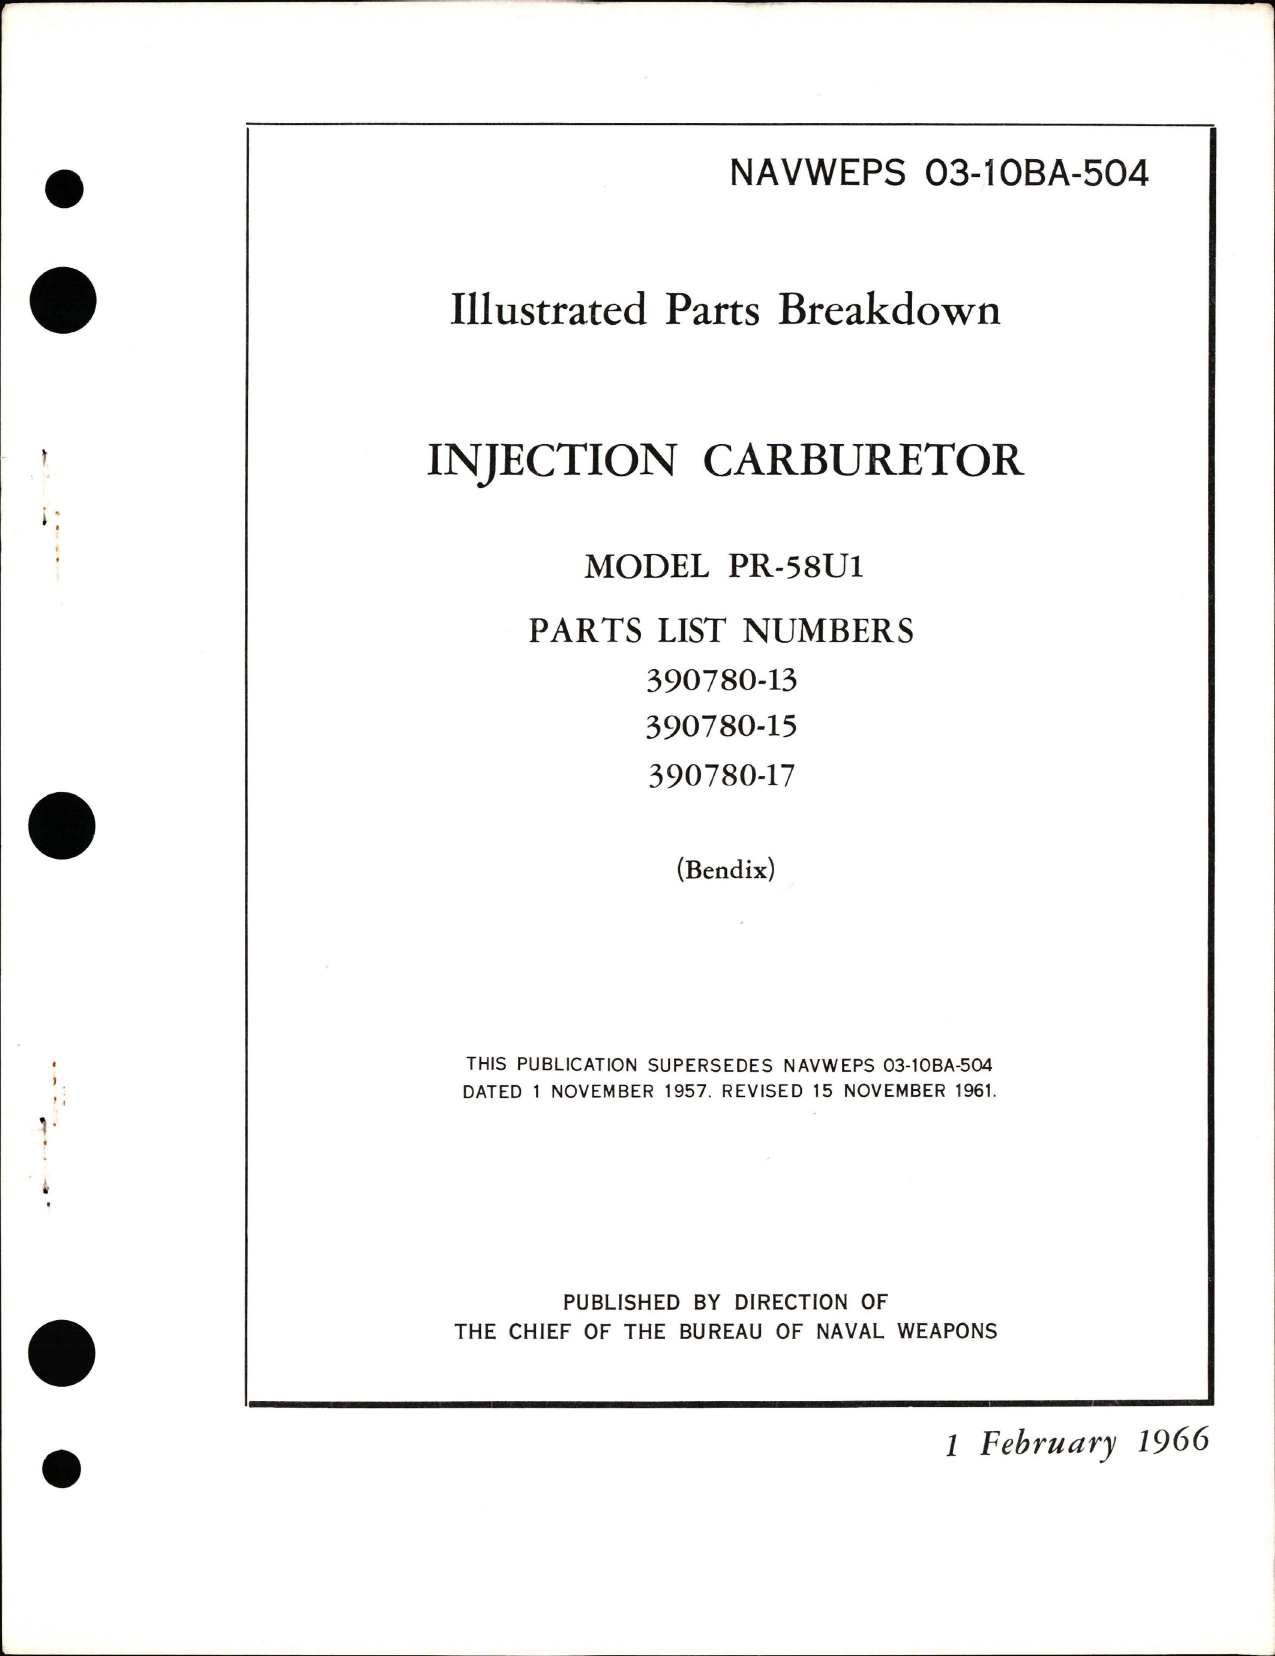 Sample page 1 from AirCorps Library document: Illustrated Parts Breakdown for Injection Carburetor - Model PR-58U1 - Parts 390780-13, 390780-15, and 390780-17